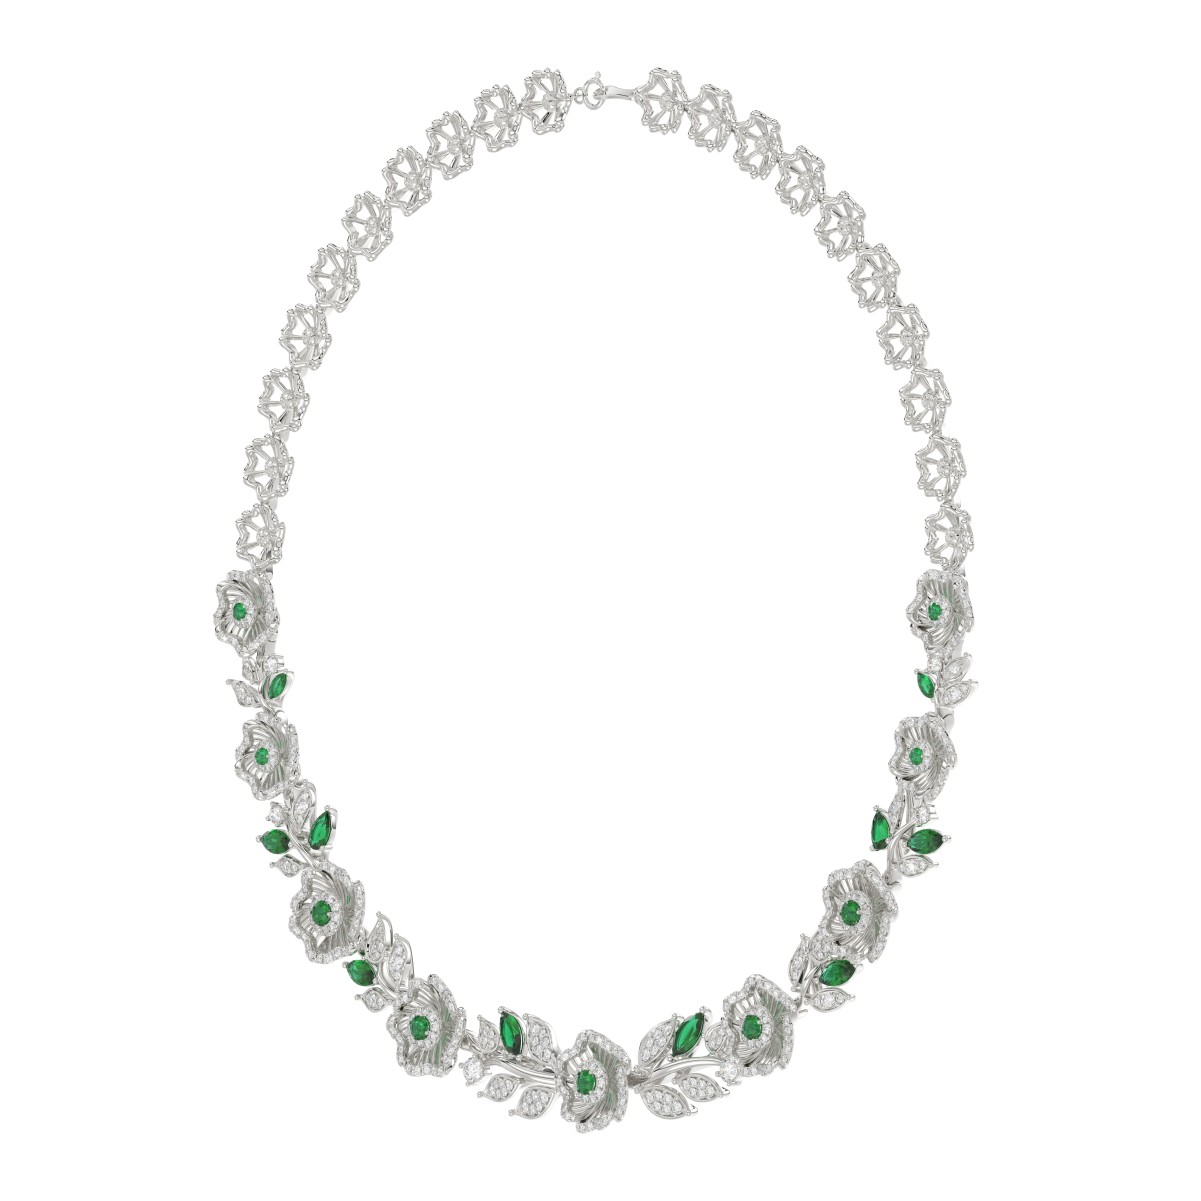 18K WHITE GOLD 6 1/3CT ROUND/EMERALD/PEAR/MARQUISE DIAMOND LADIES NECKLACE(COLOR STONE GREEN EMERALD ROUND DIAMOND 3/8CT / PEAR DIAMOND 1/2CT / MARQUISE DIAMOND 2 1/4CT)